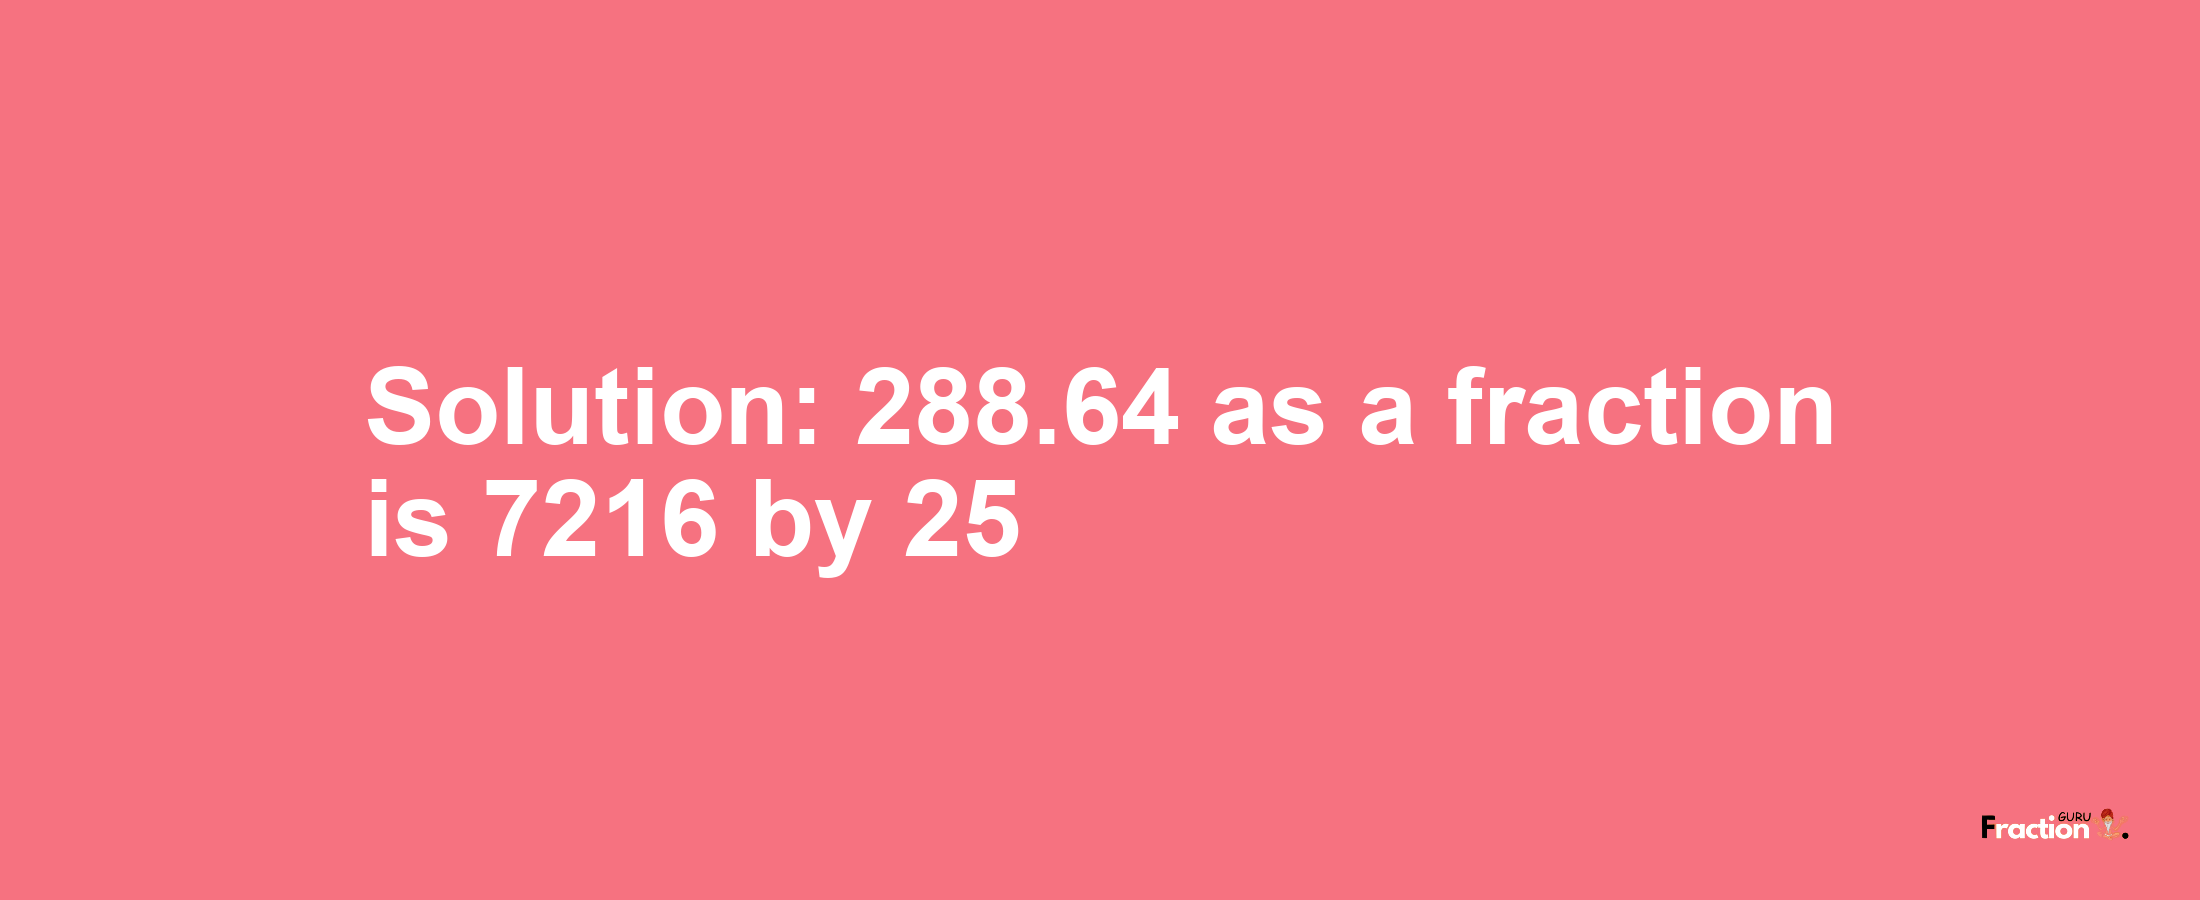 Solution:288.64 as a fraction is 7216/25